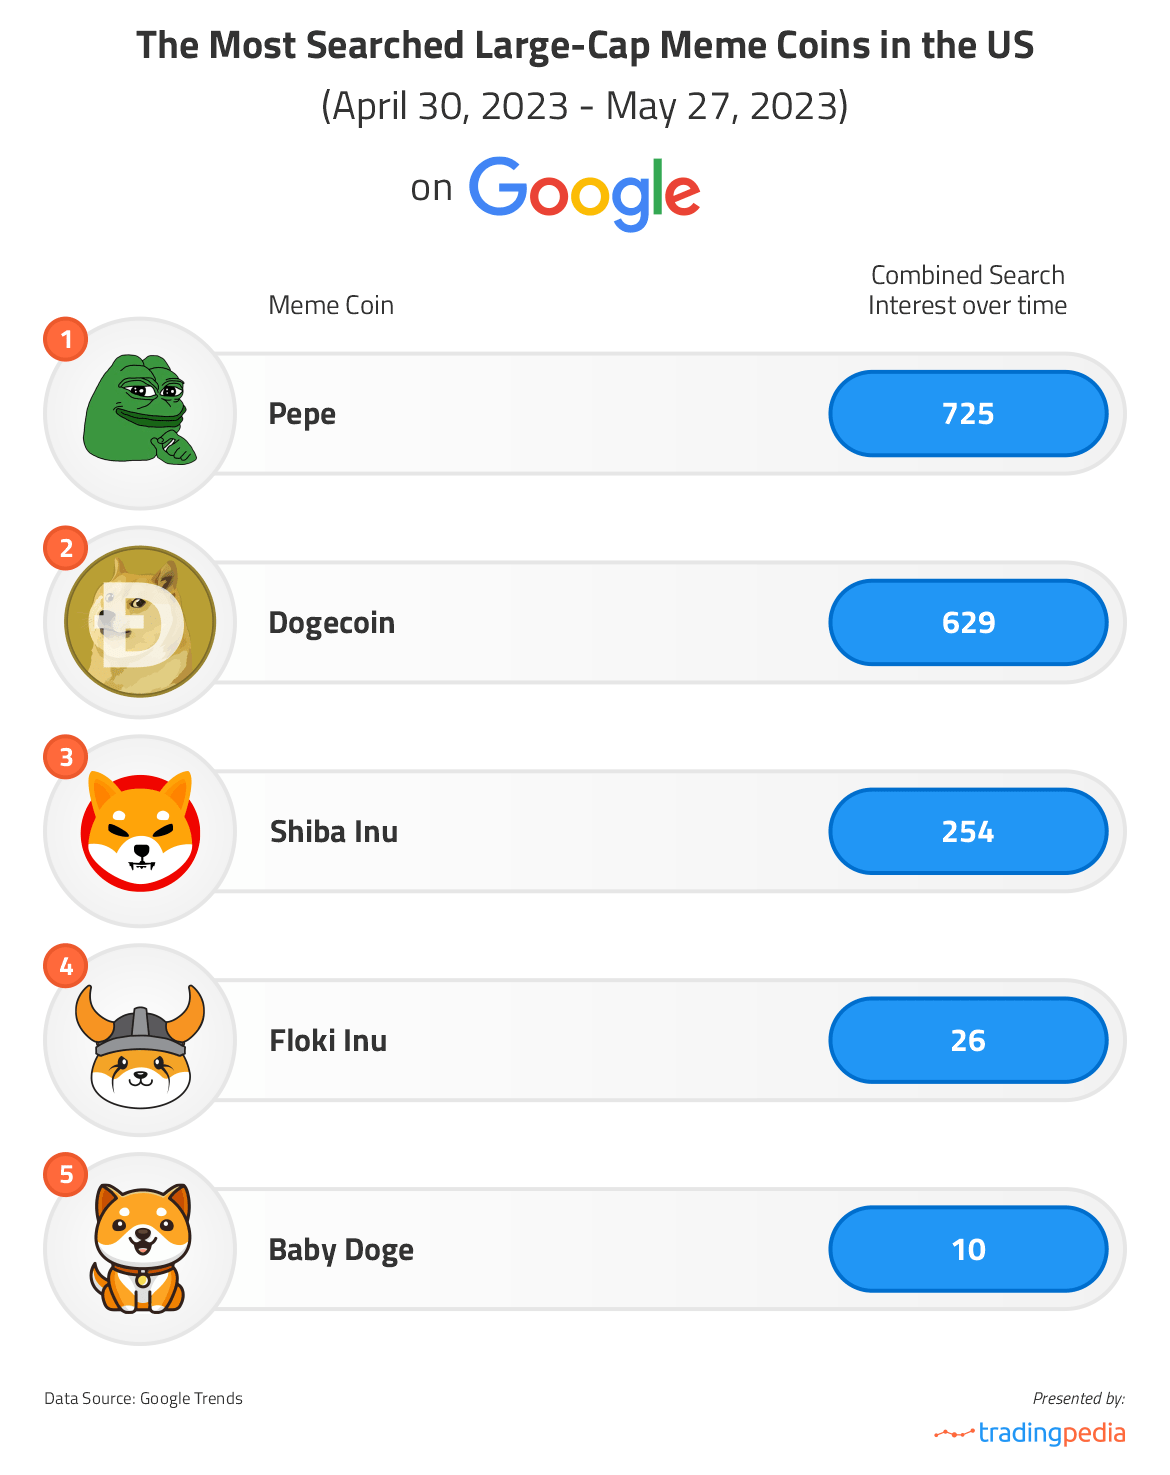 The most searched meme coins in the US